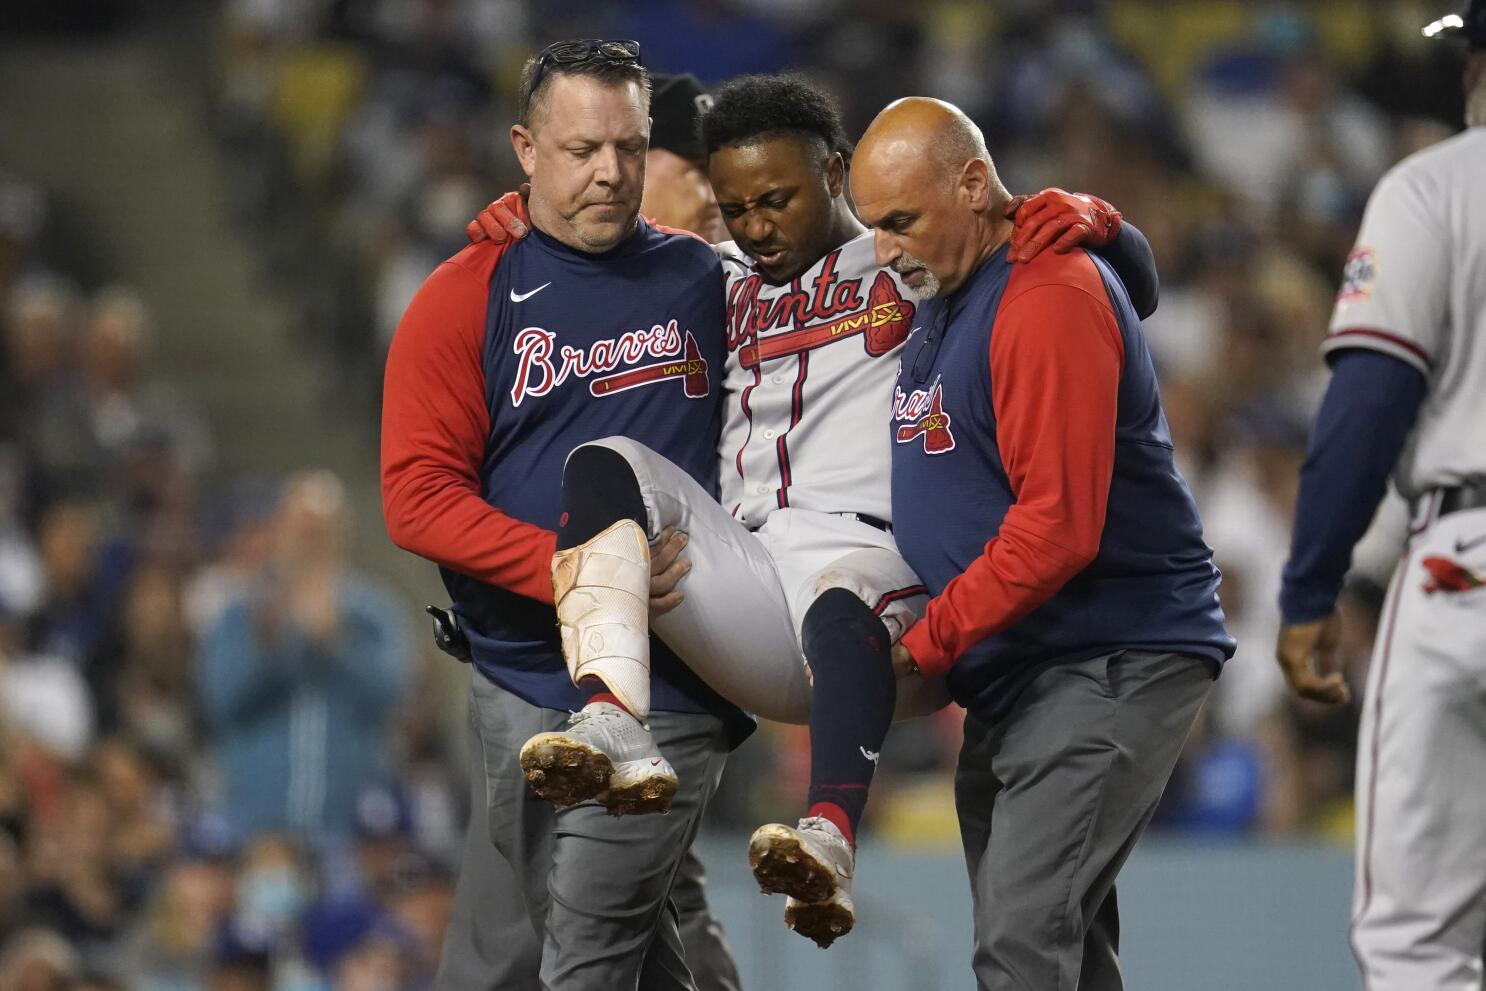 Braves star Albies carried away after fouling ball off knee - The